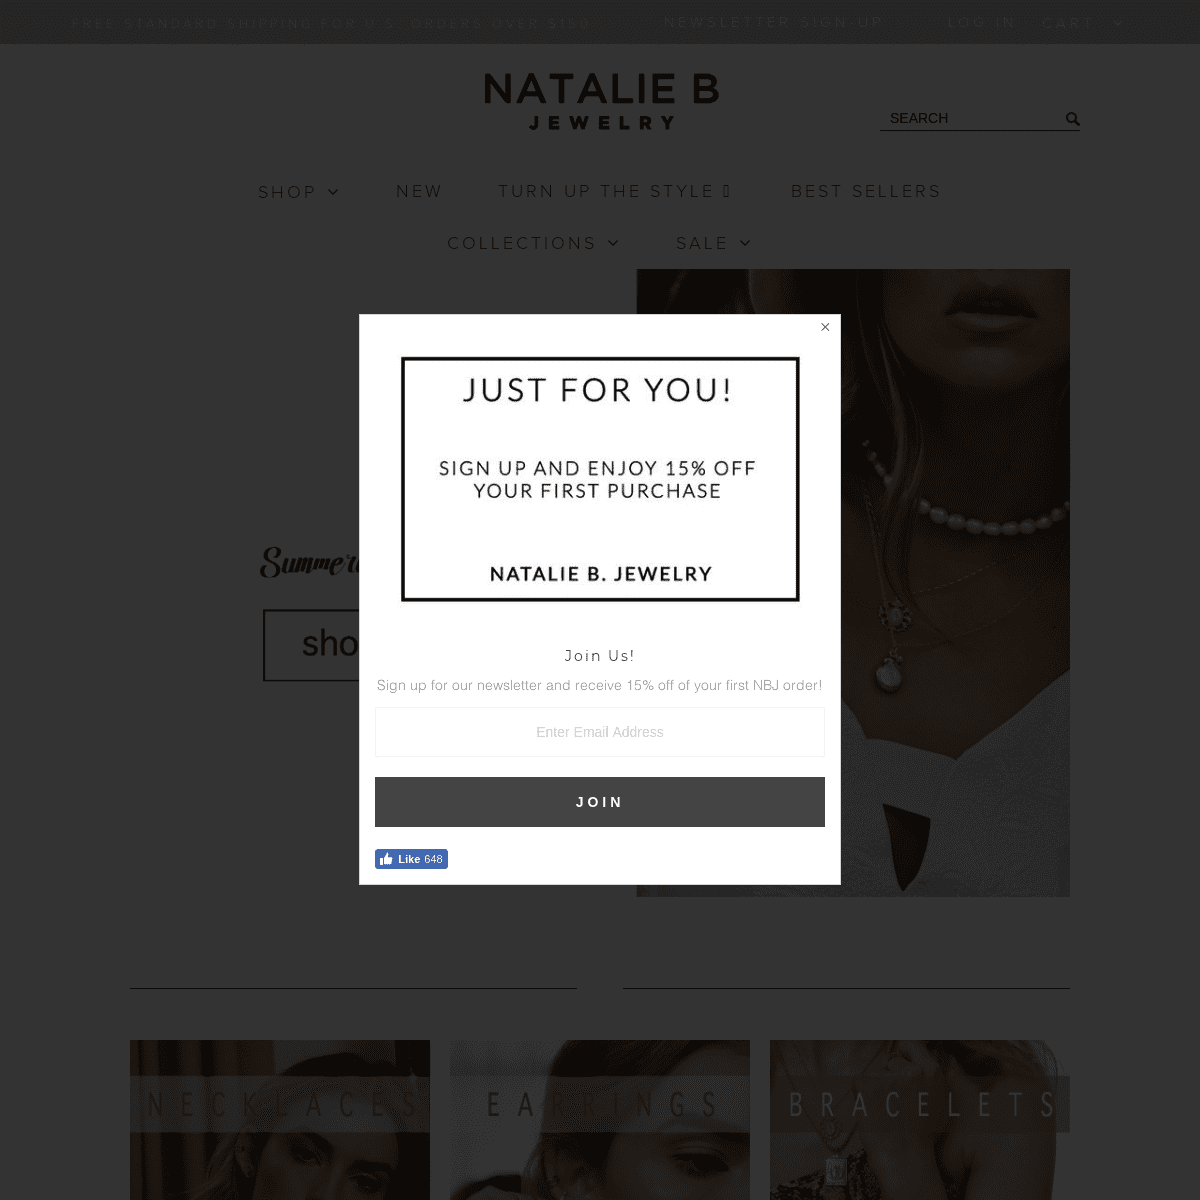 A complete backup of nataliebjewelry.com